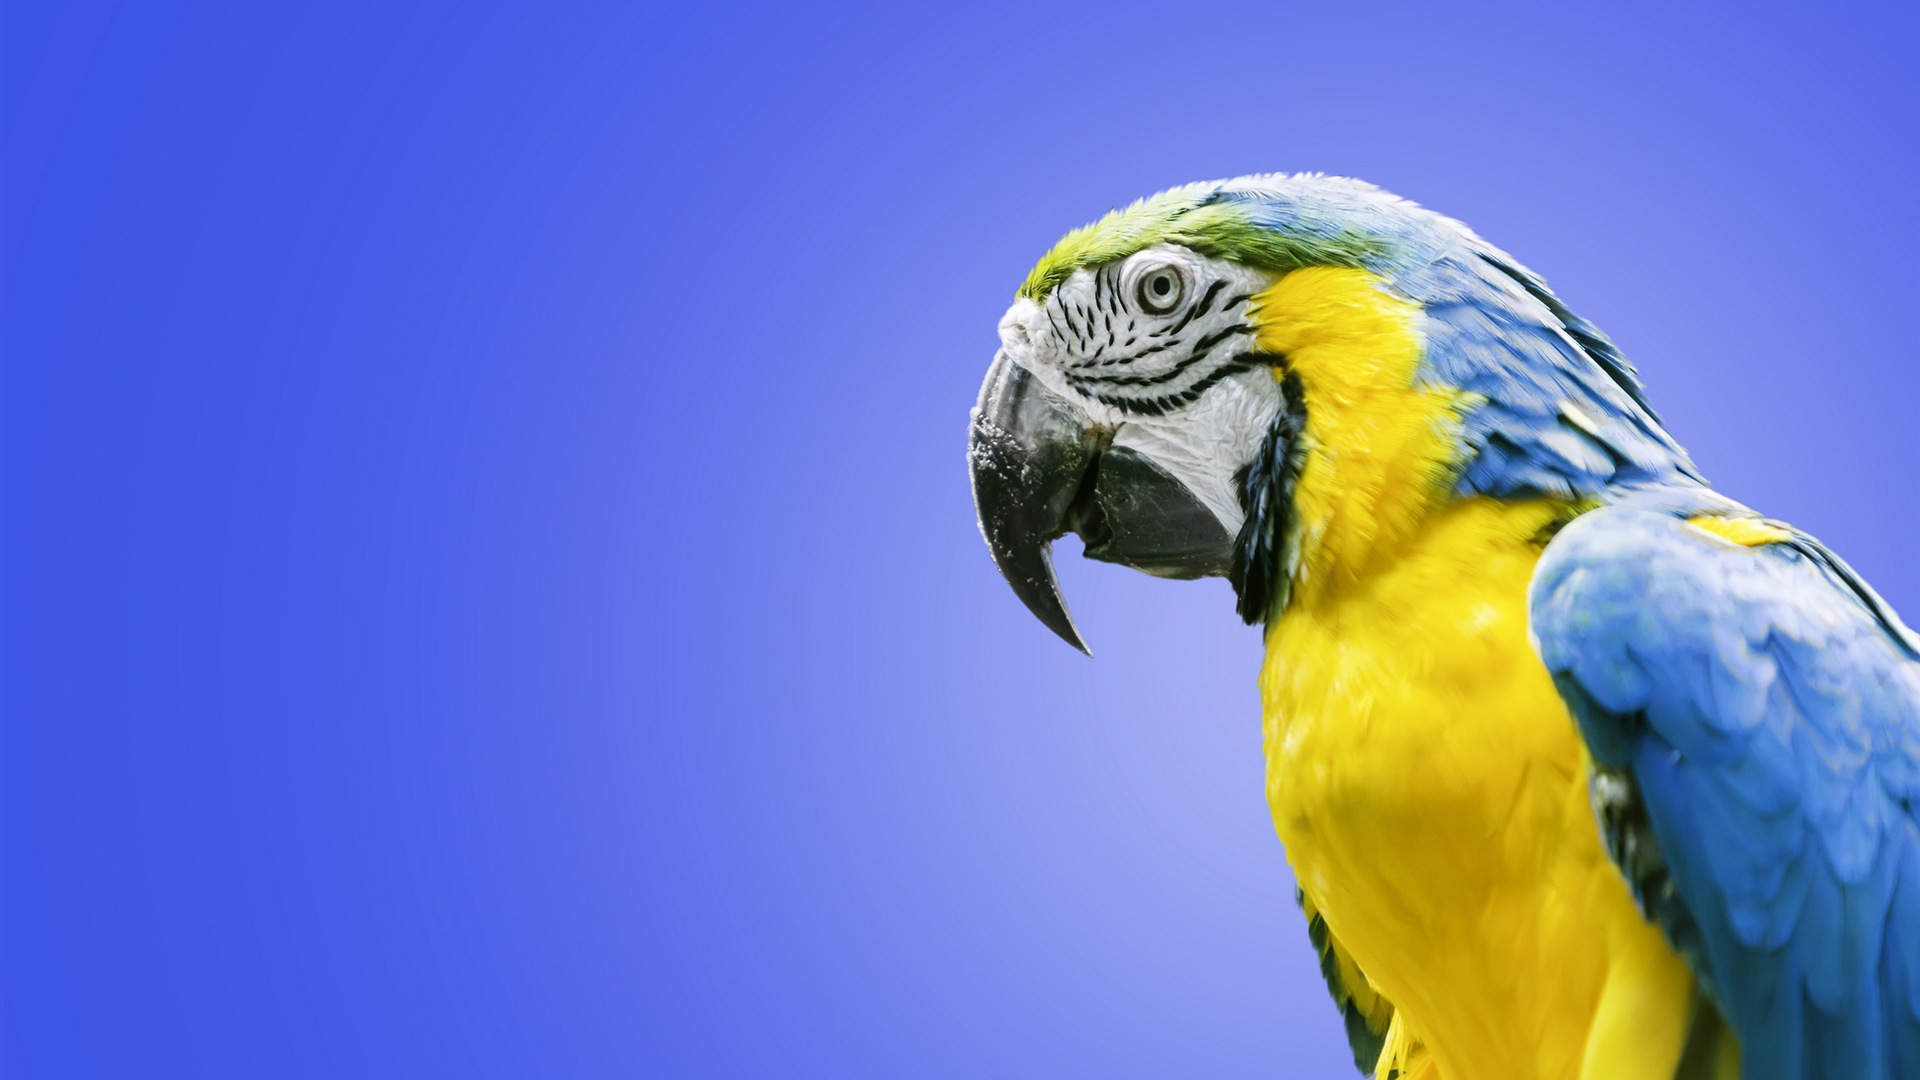 Macaw close-up HD wallpapers #24 - 1920x1080